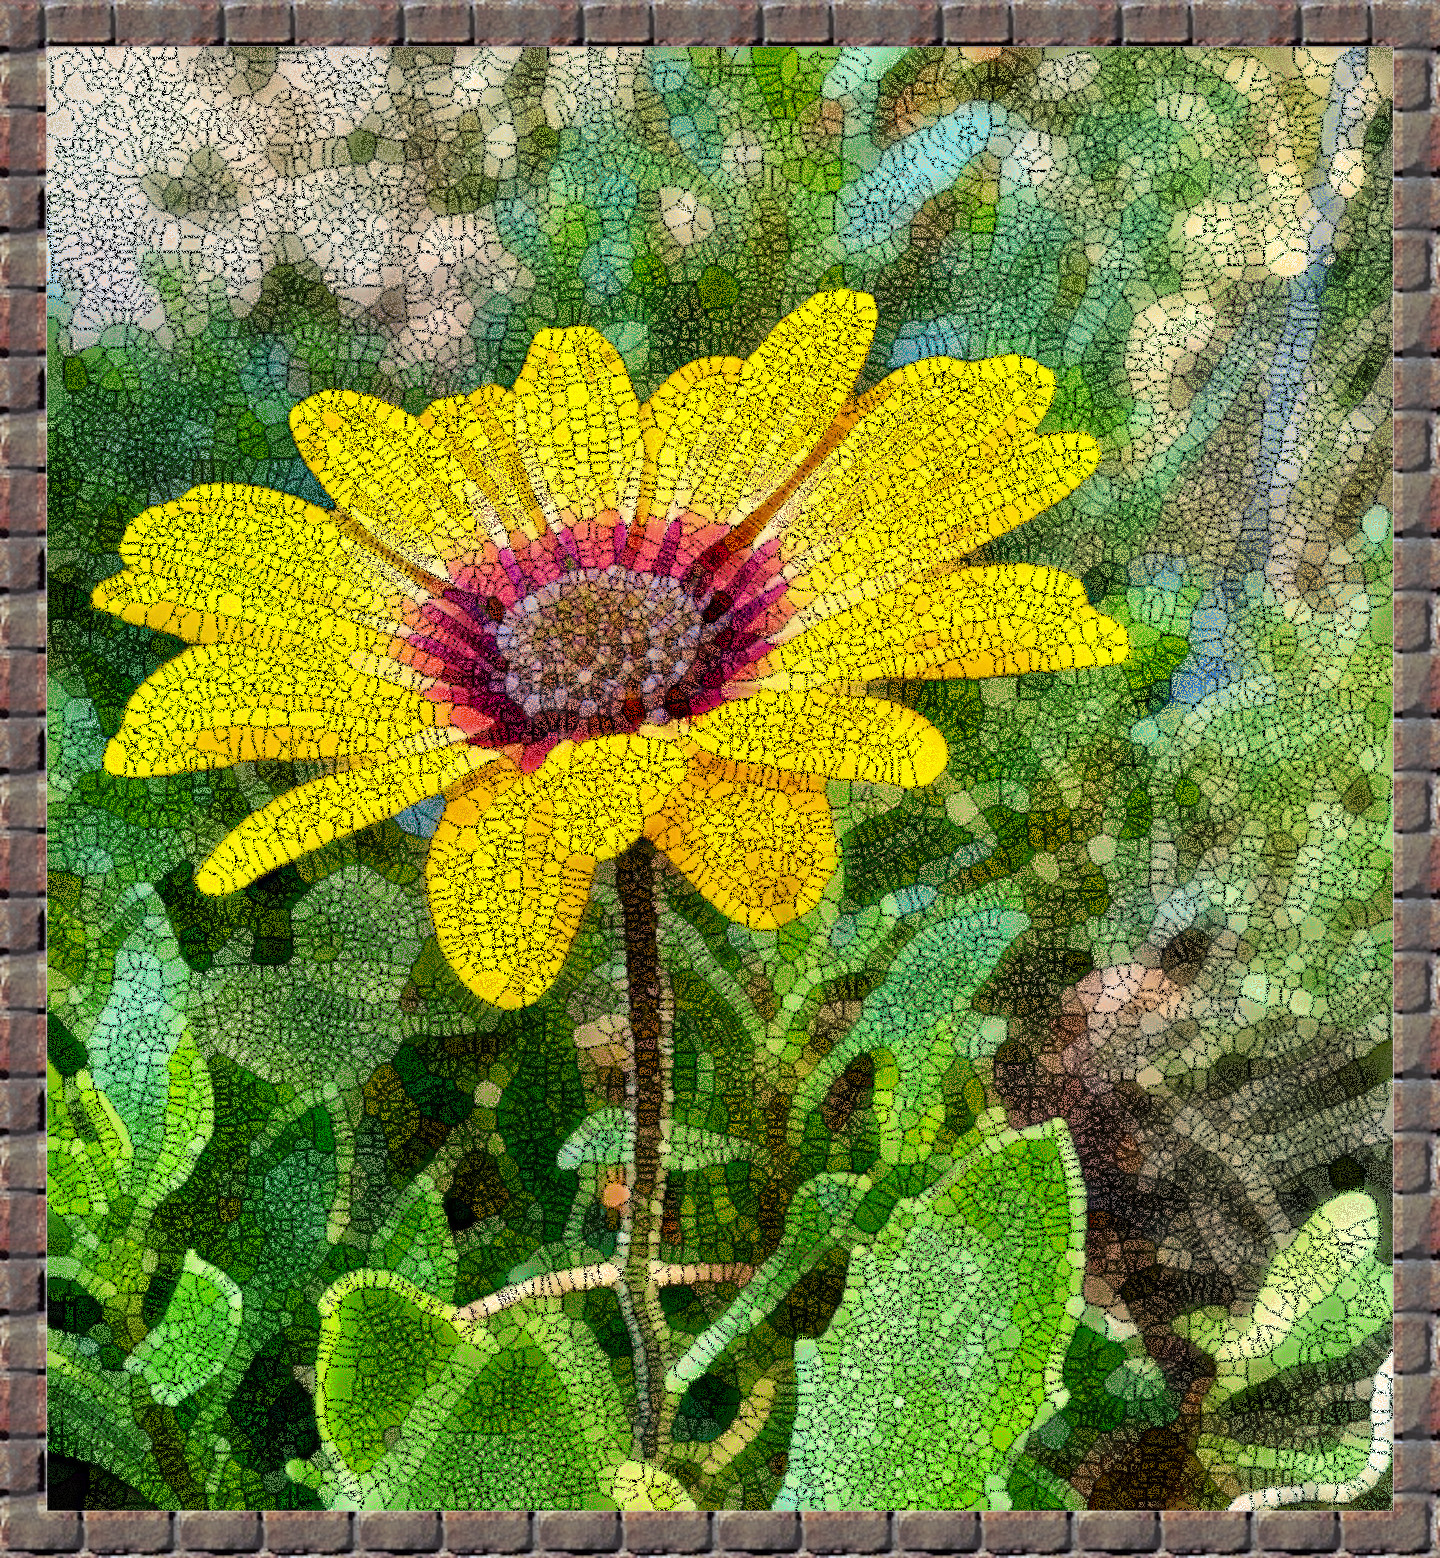 another_flower_by_ilaughter_dedveie_DN_Simple_Graphics_Mosaic_Texture_Coloree.jpg